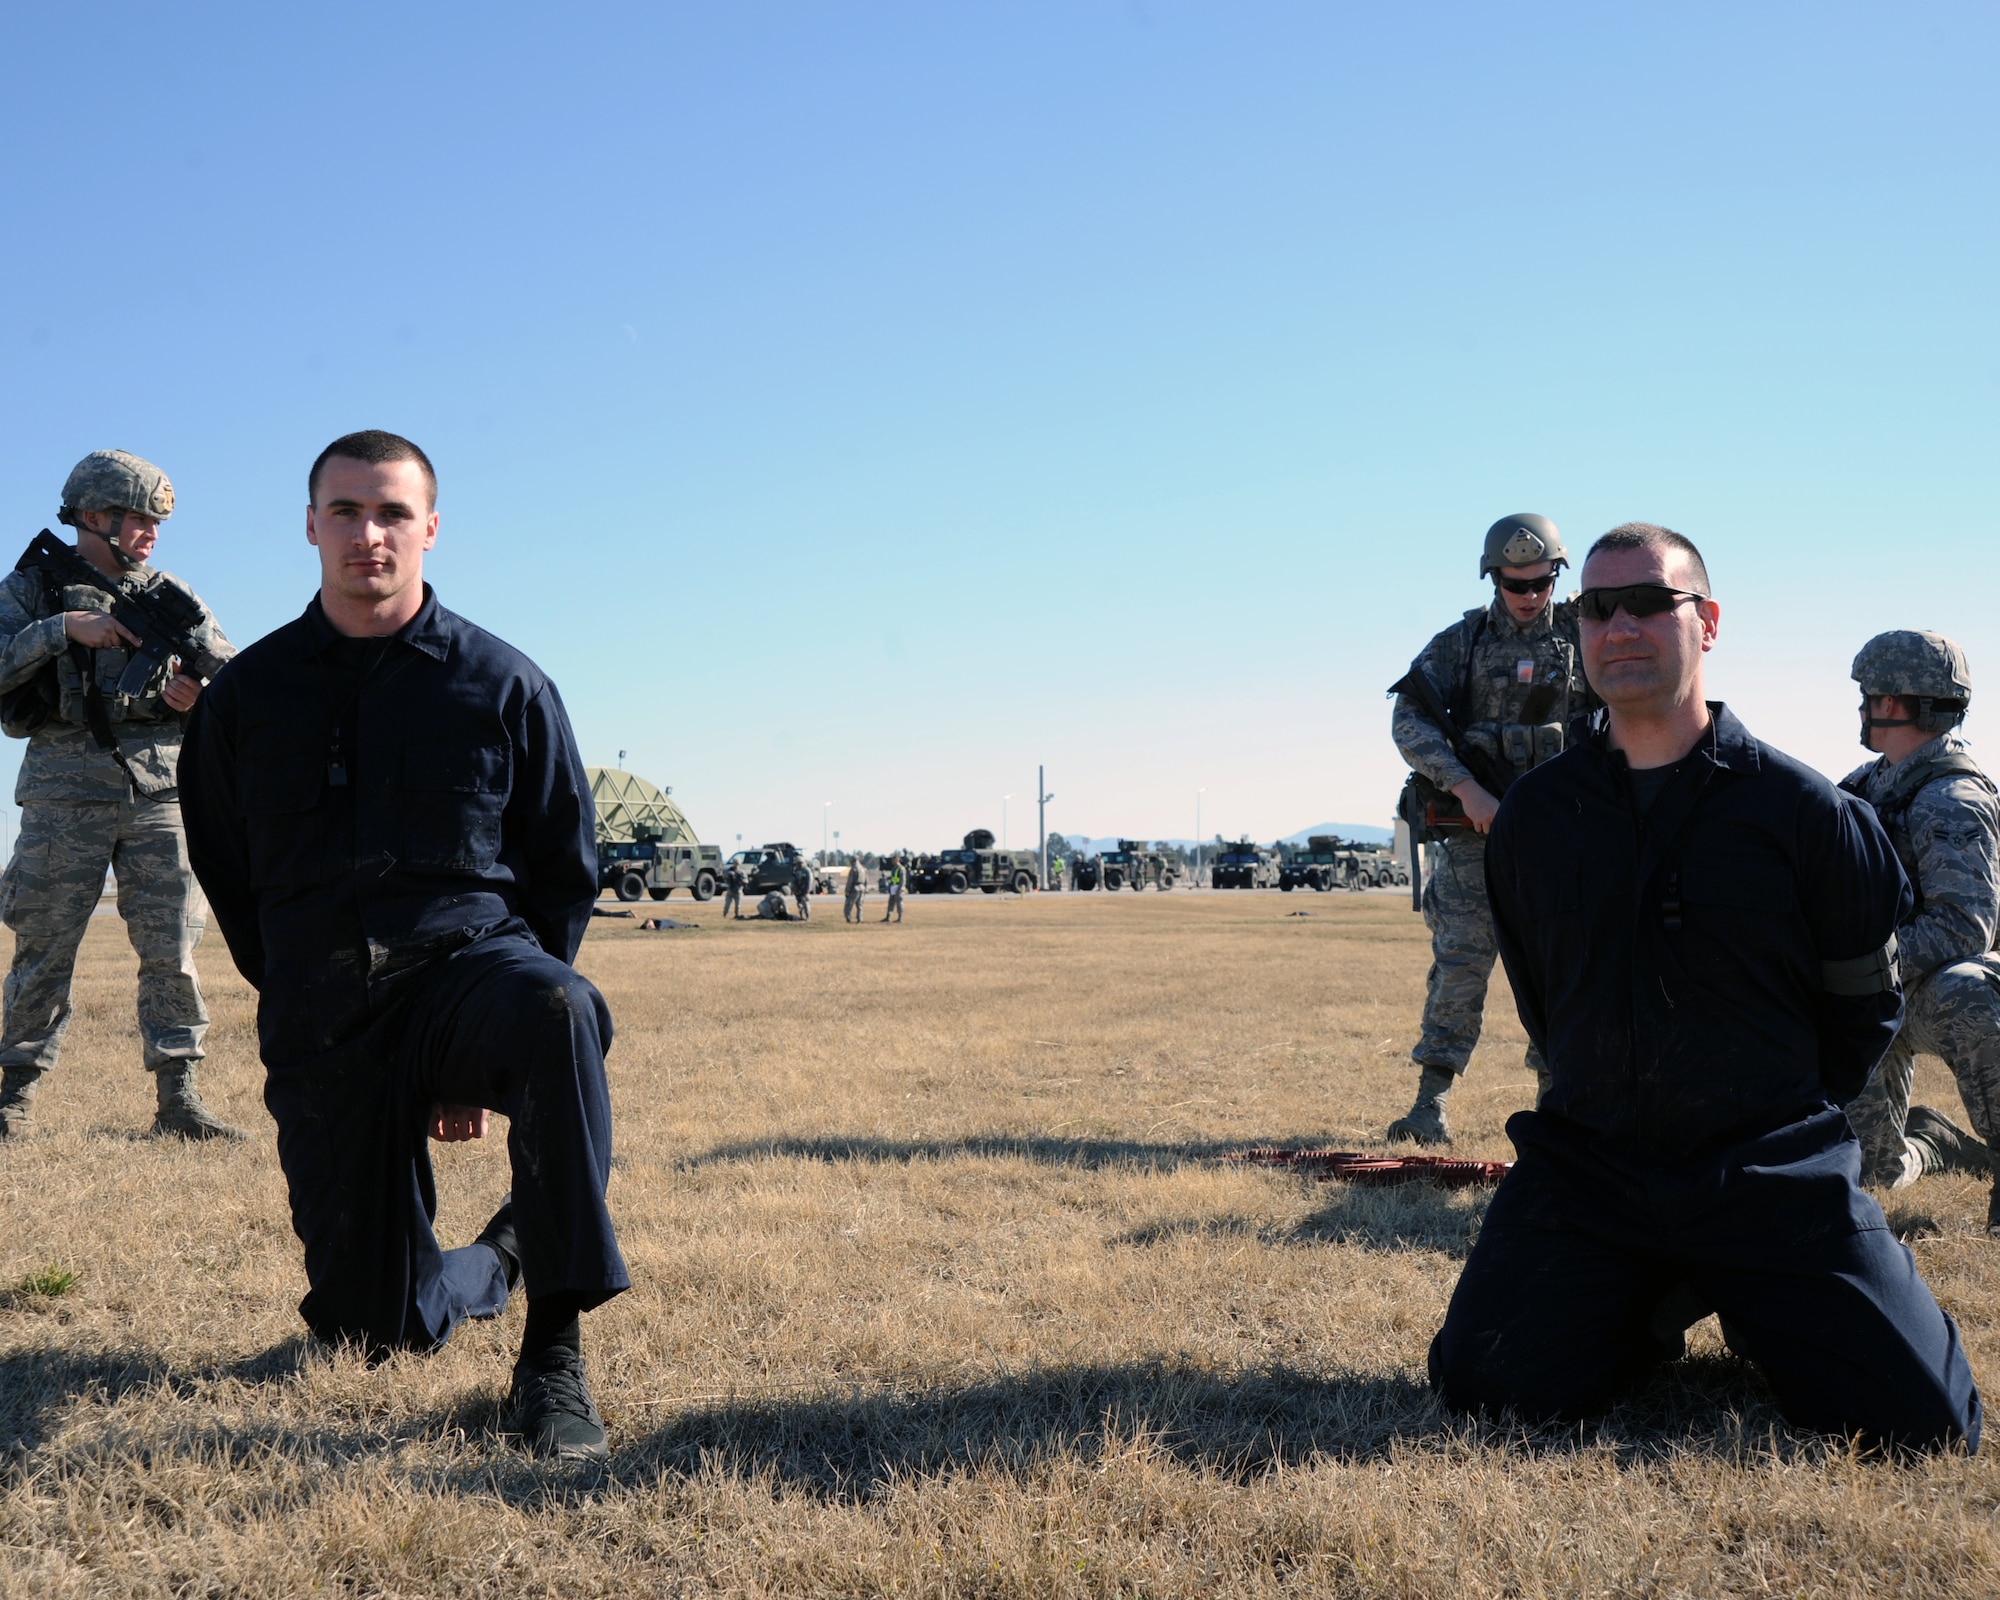 U.S. Airmen from the 39th Security forces defenders guard detained opposing forces during an exercise Jan. 15, 2016, on Incirlik Air Base, Turkey. As part of the exercise defenders practiced body searching techniques on the simulated opposing forces. (U.S. Air Force photo by Airman 1st Class Daniel Lile/Released)